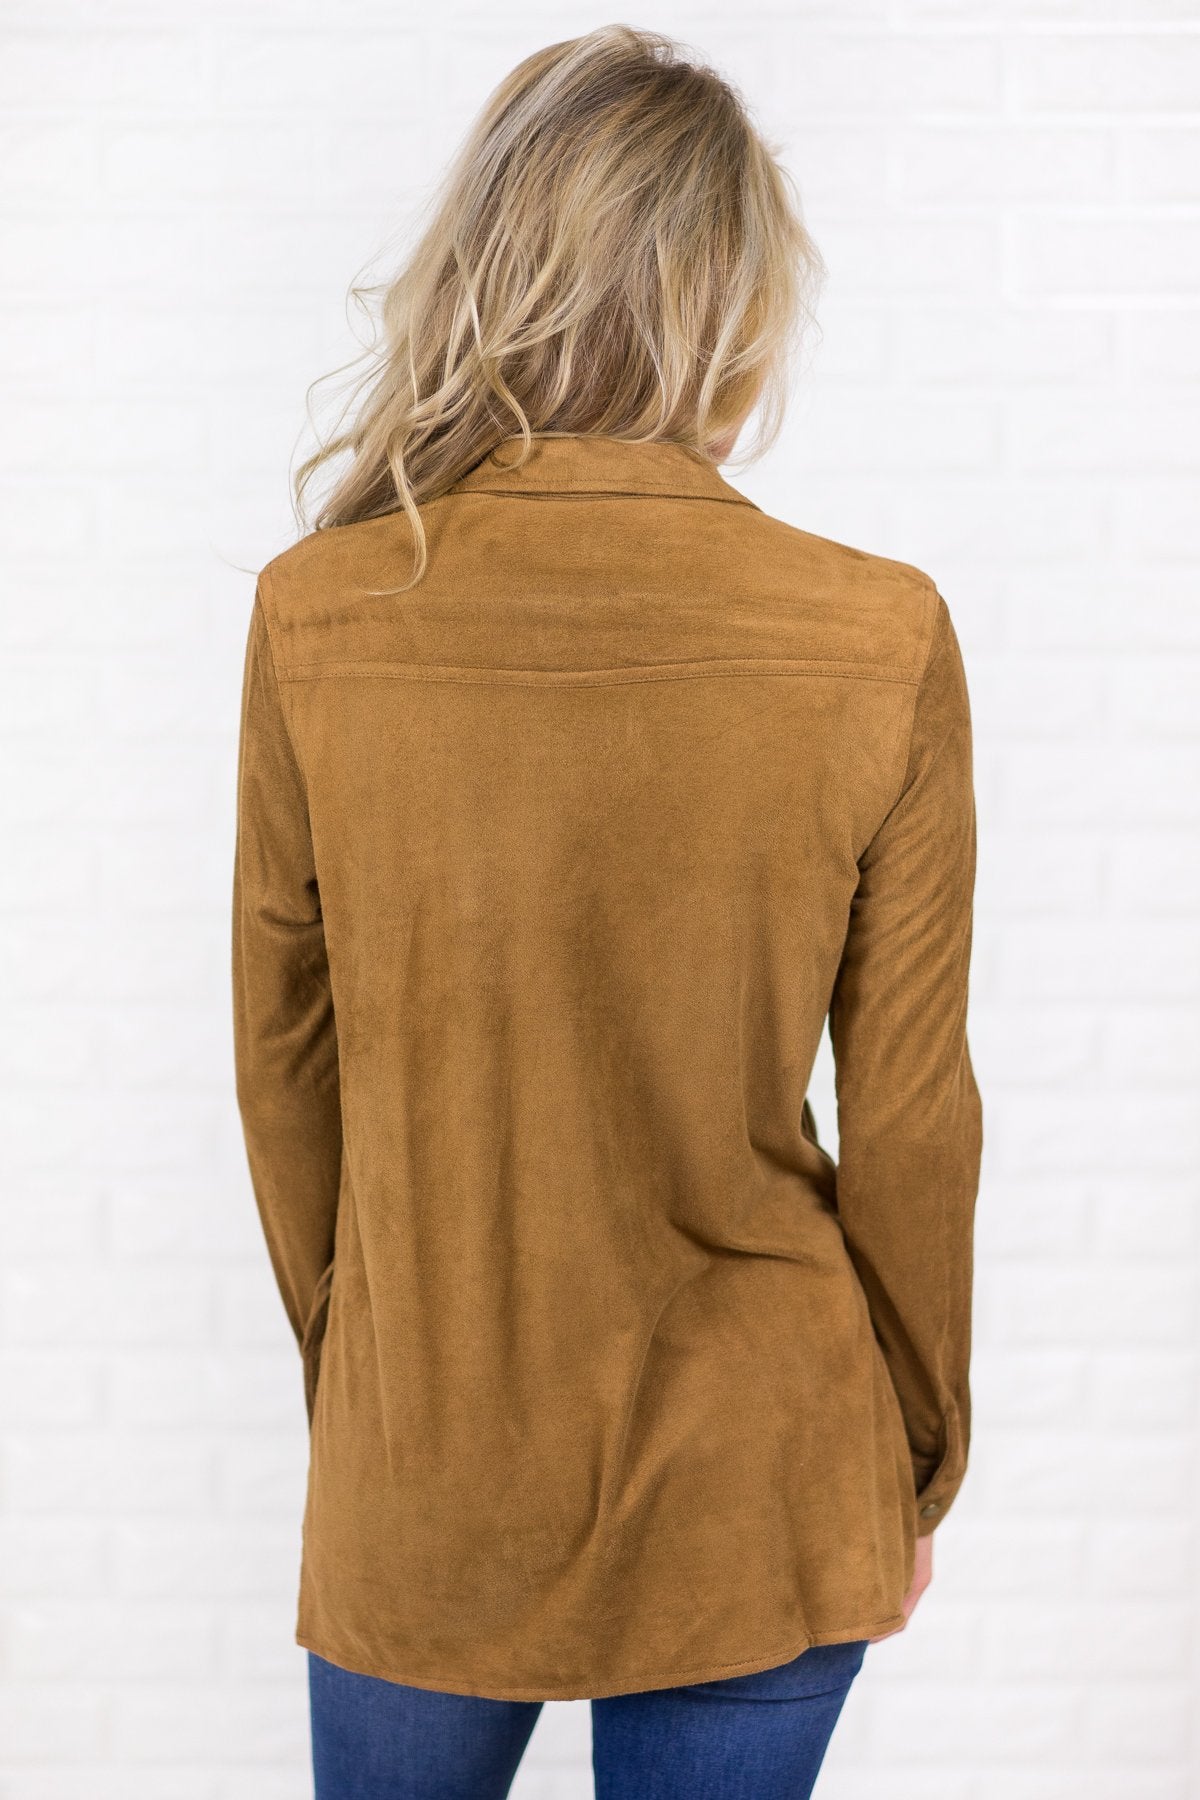 Tan Suede Button Up Top